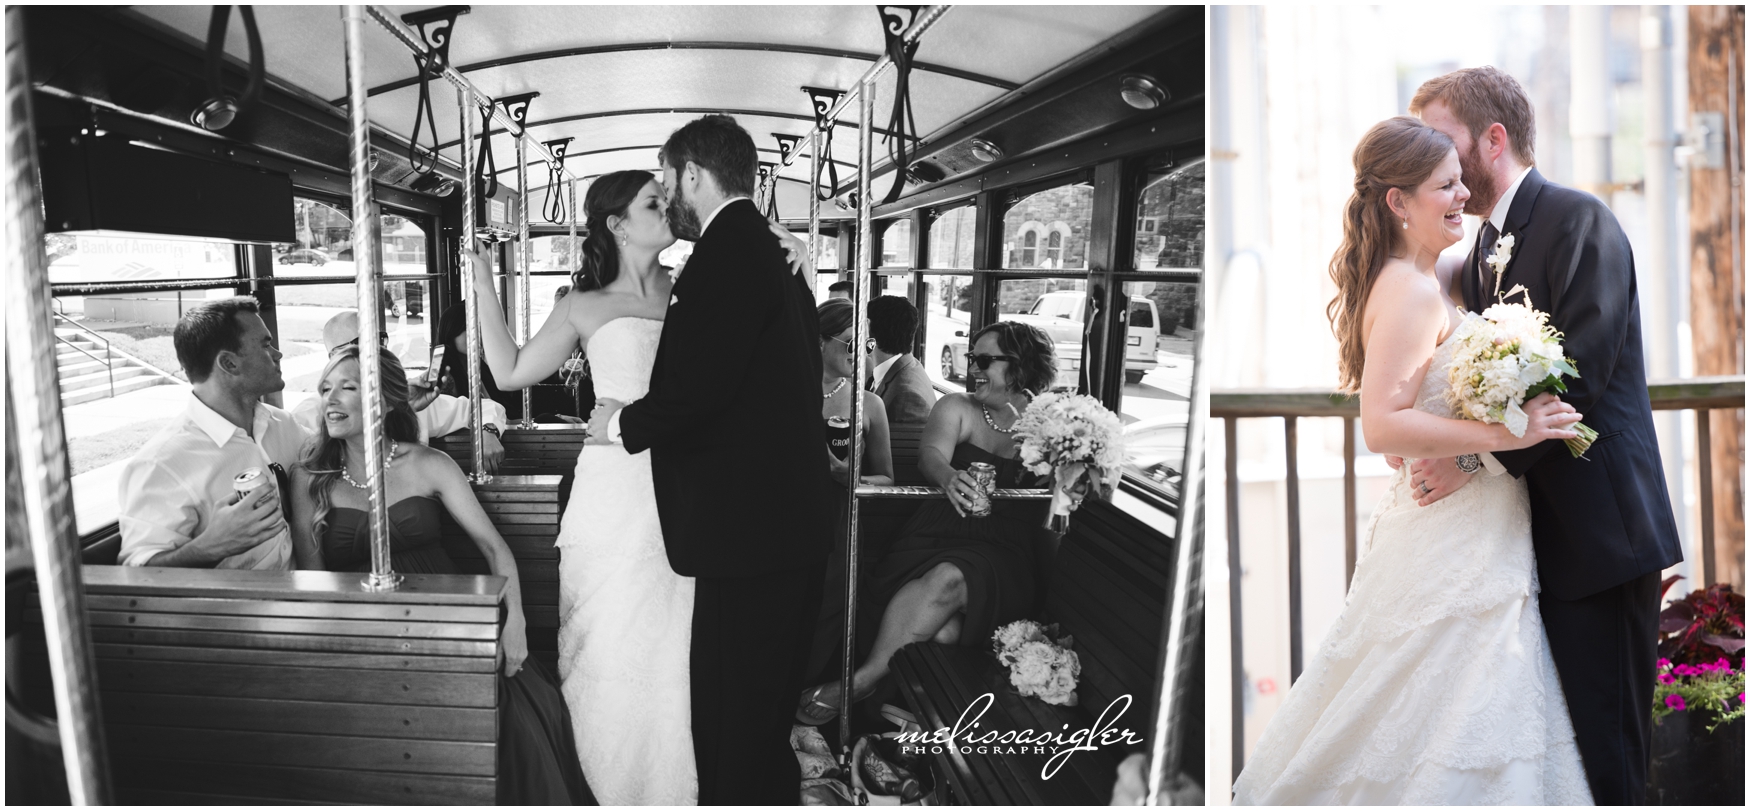 Wedding party trolley in Lawrence Kansas by Melissa Sigler Photography